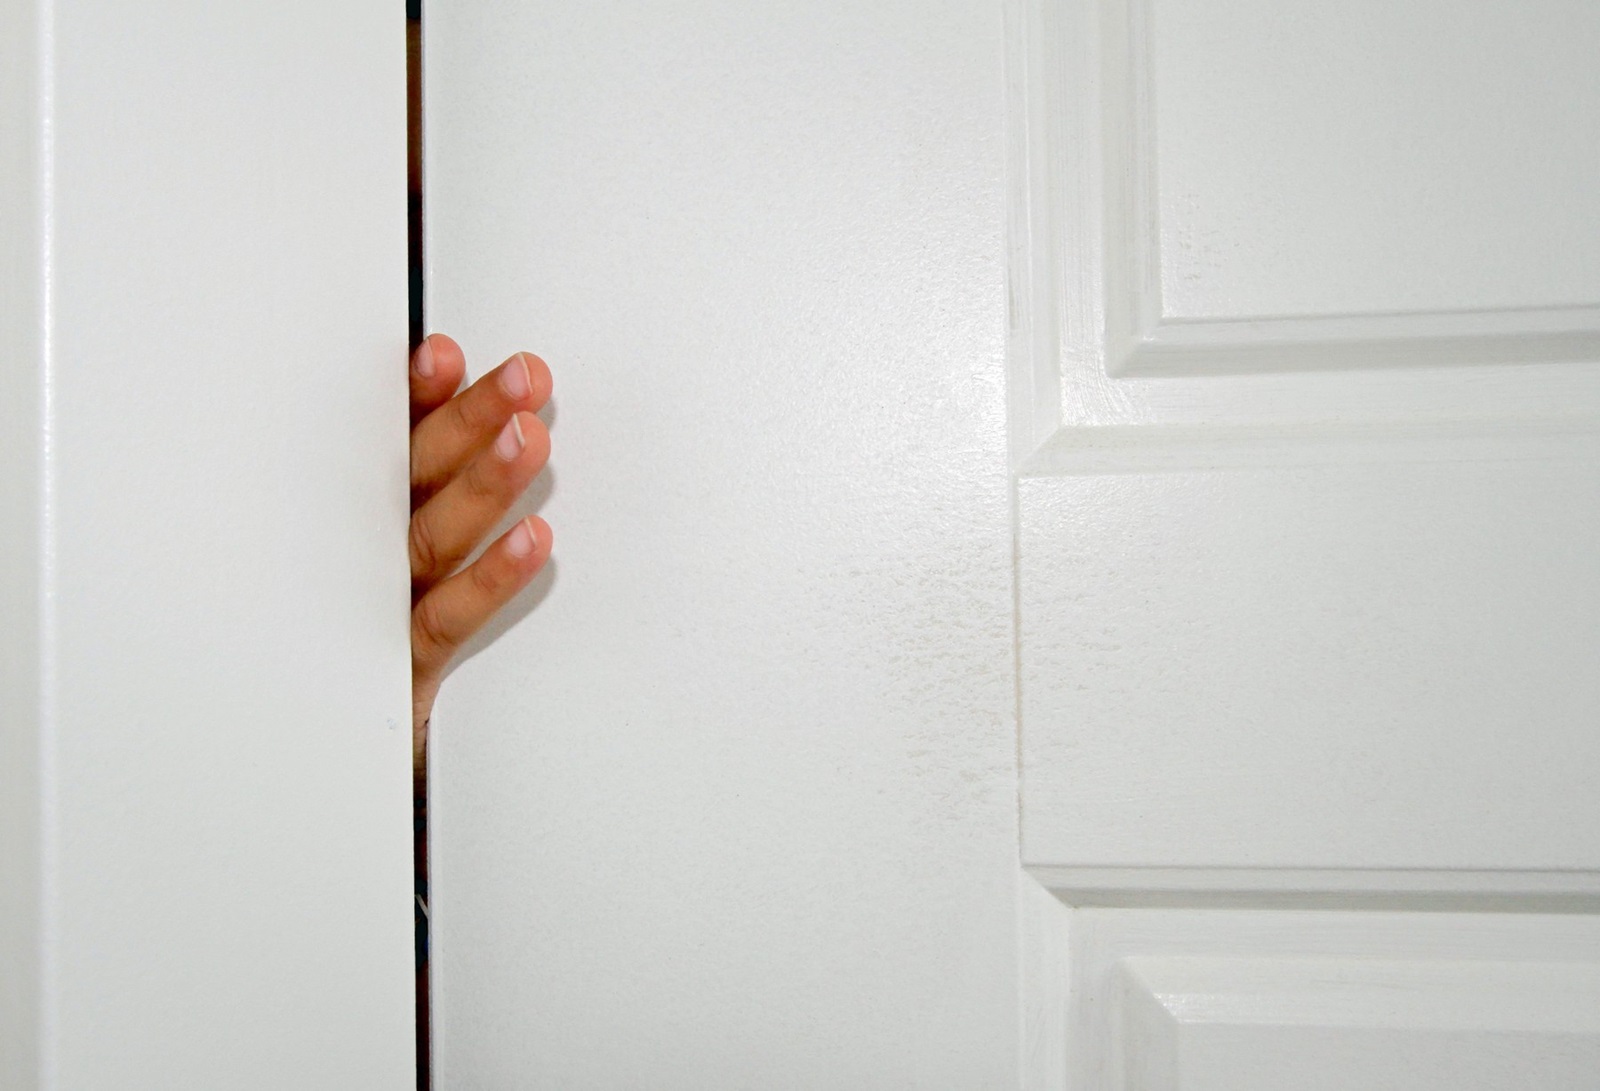 Small fingers stuck in white door inside of house,Image: 557350207, License: Royalty-free, Restrictions: , Model Release: no, Credit line: Nadine Mitchell / Panthermedia / Profimedia